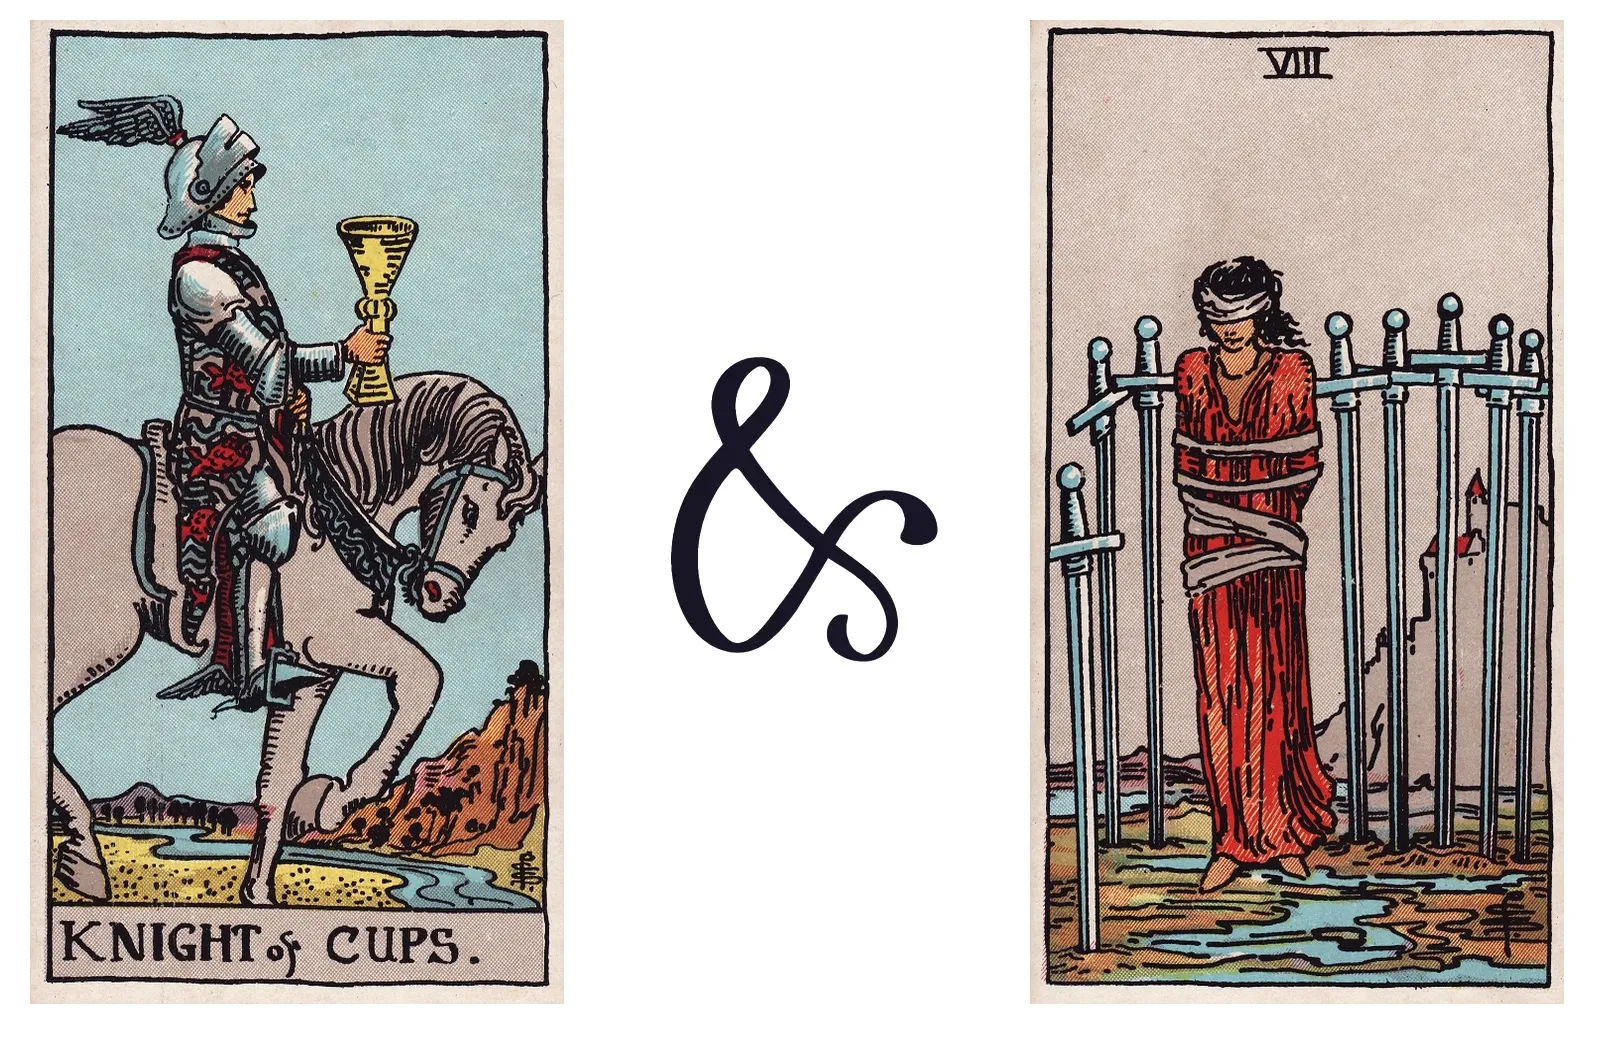 Knight of Cups and Eight of Swords